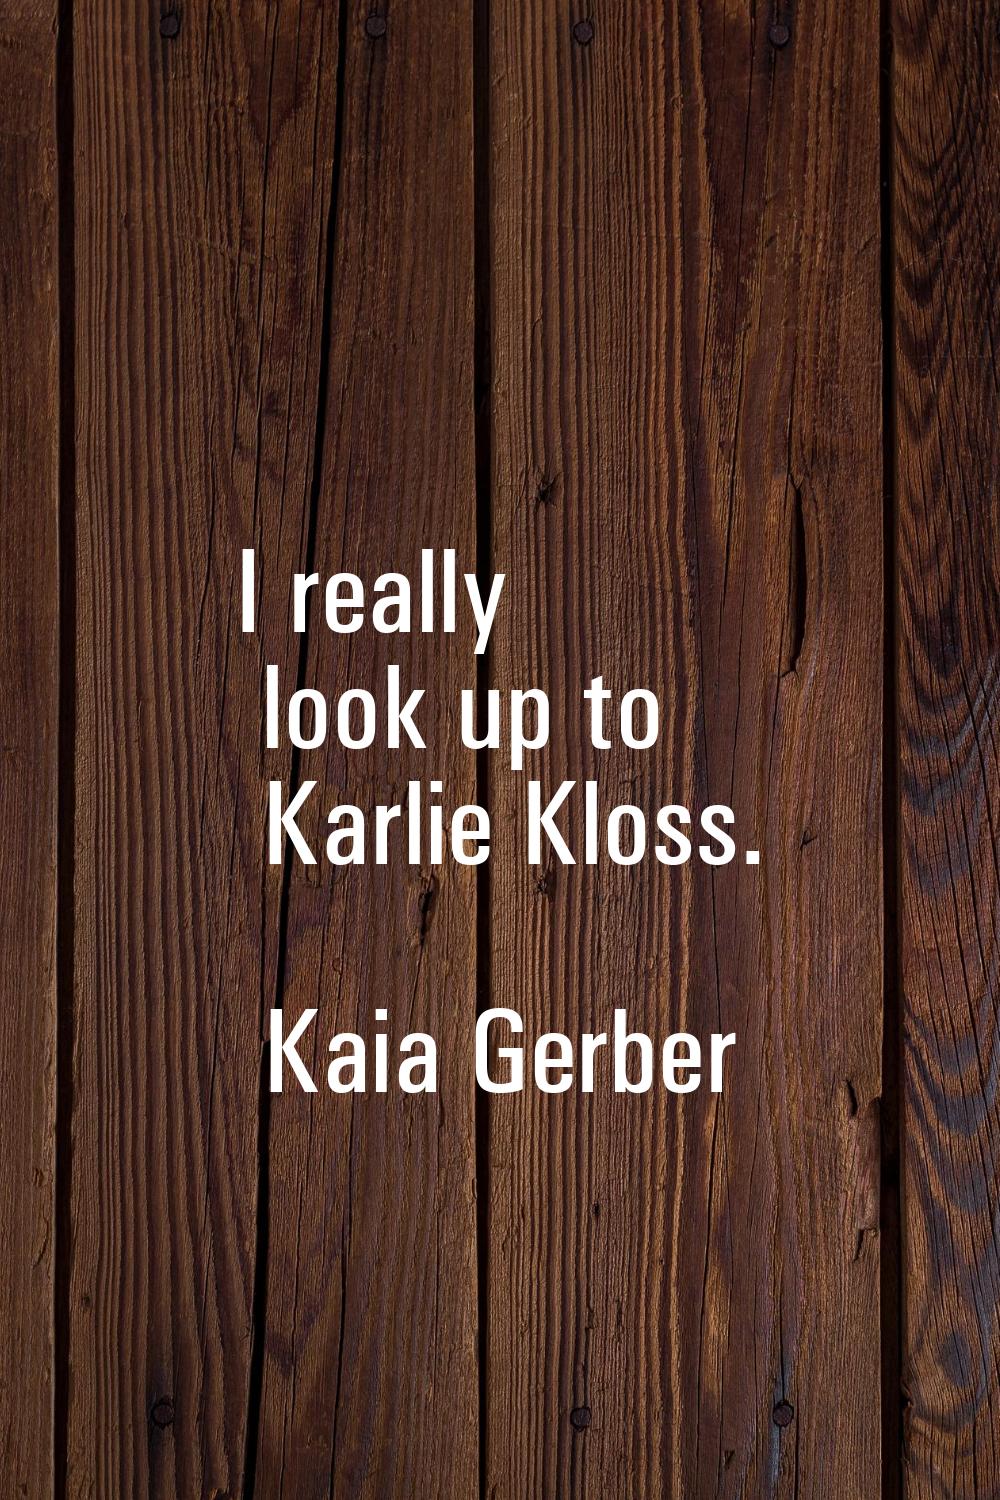 I really look up to Karlie Kloss.